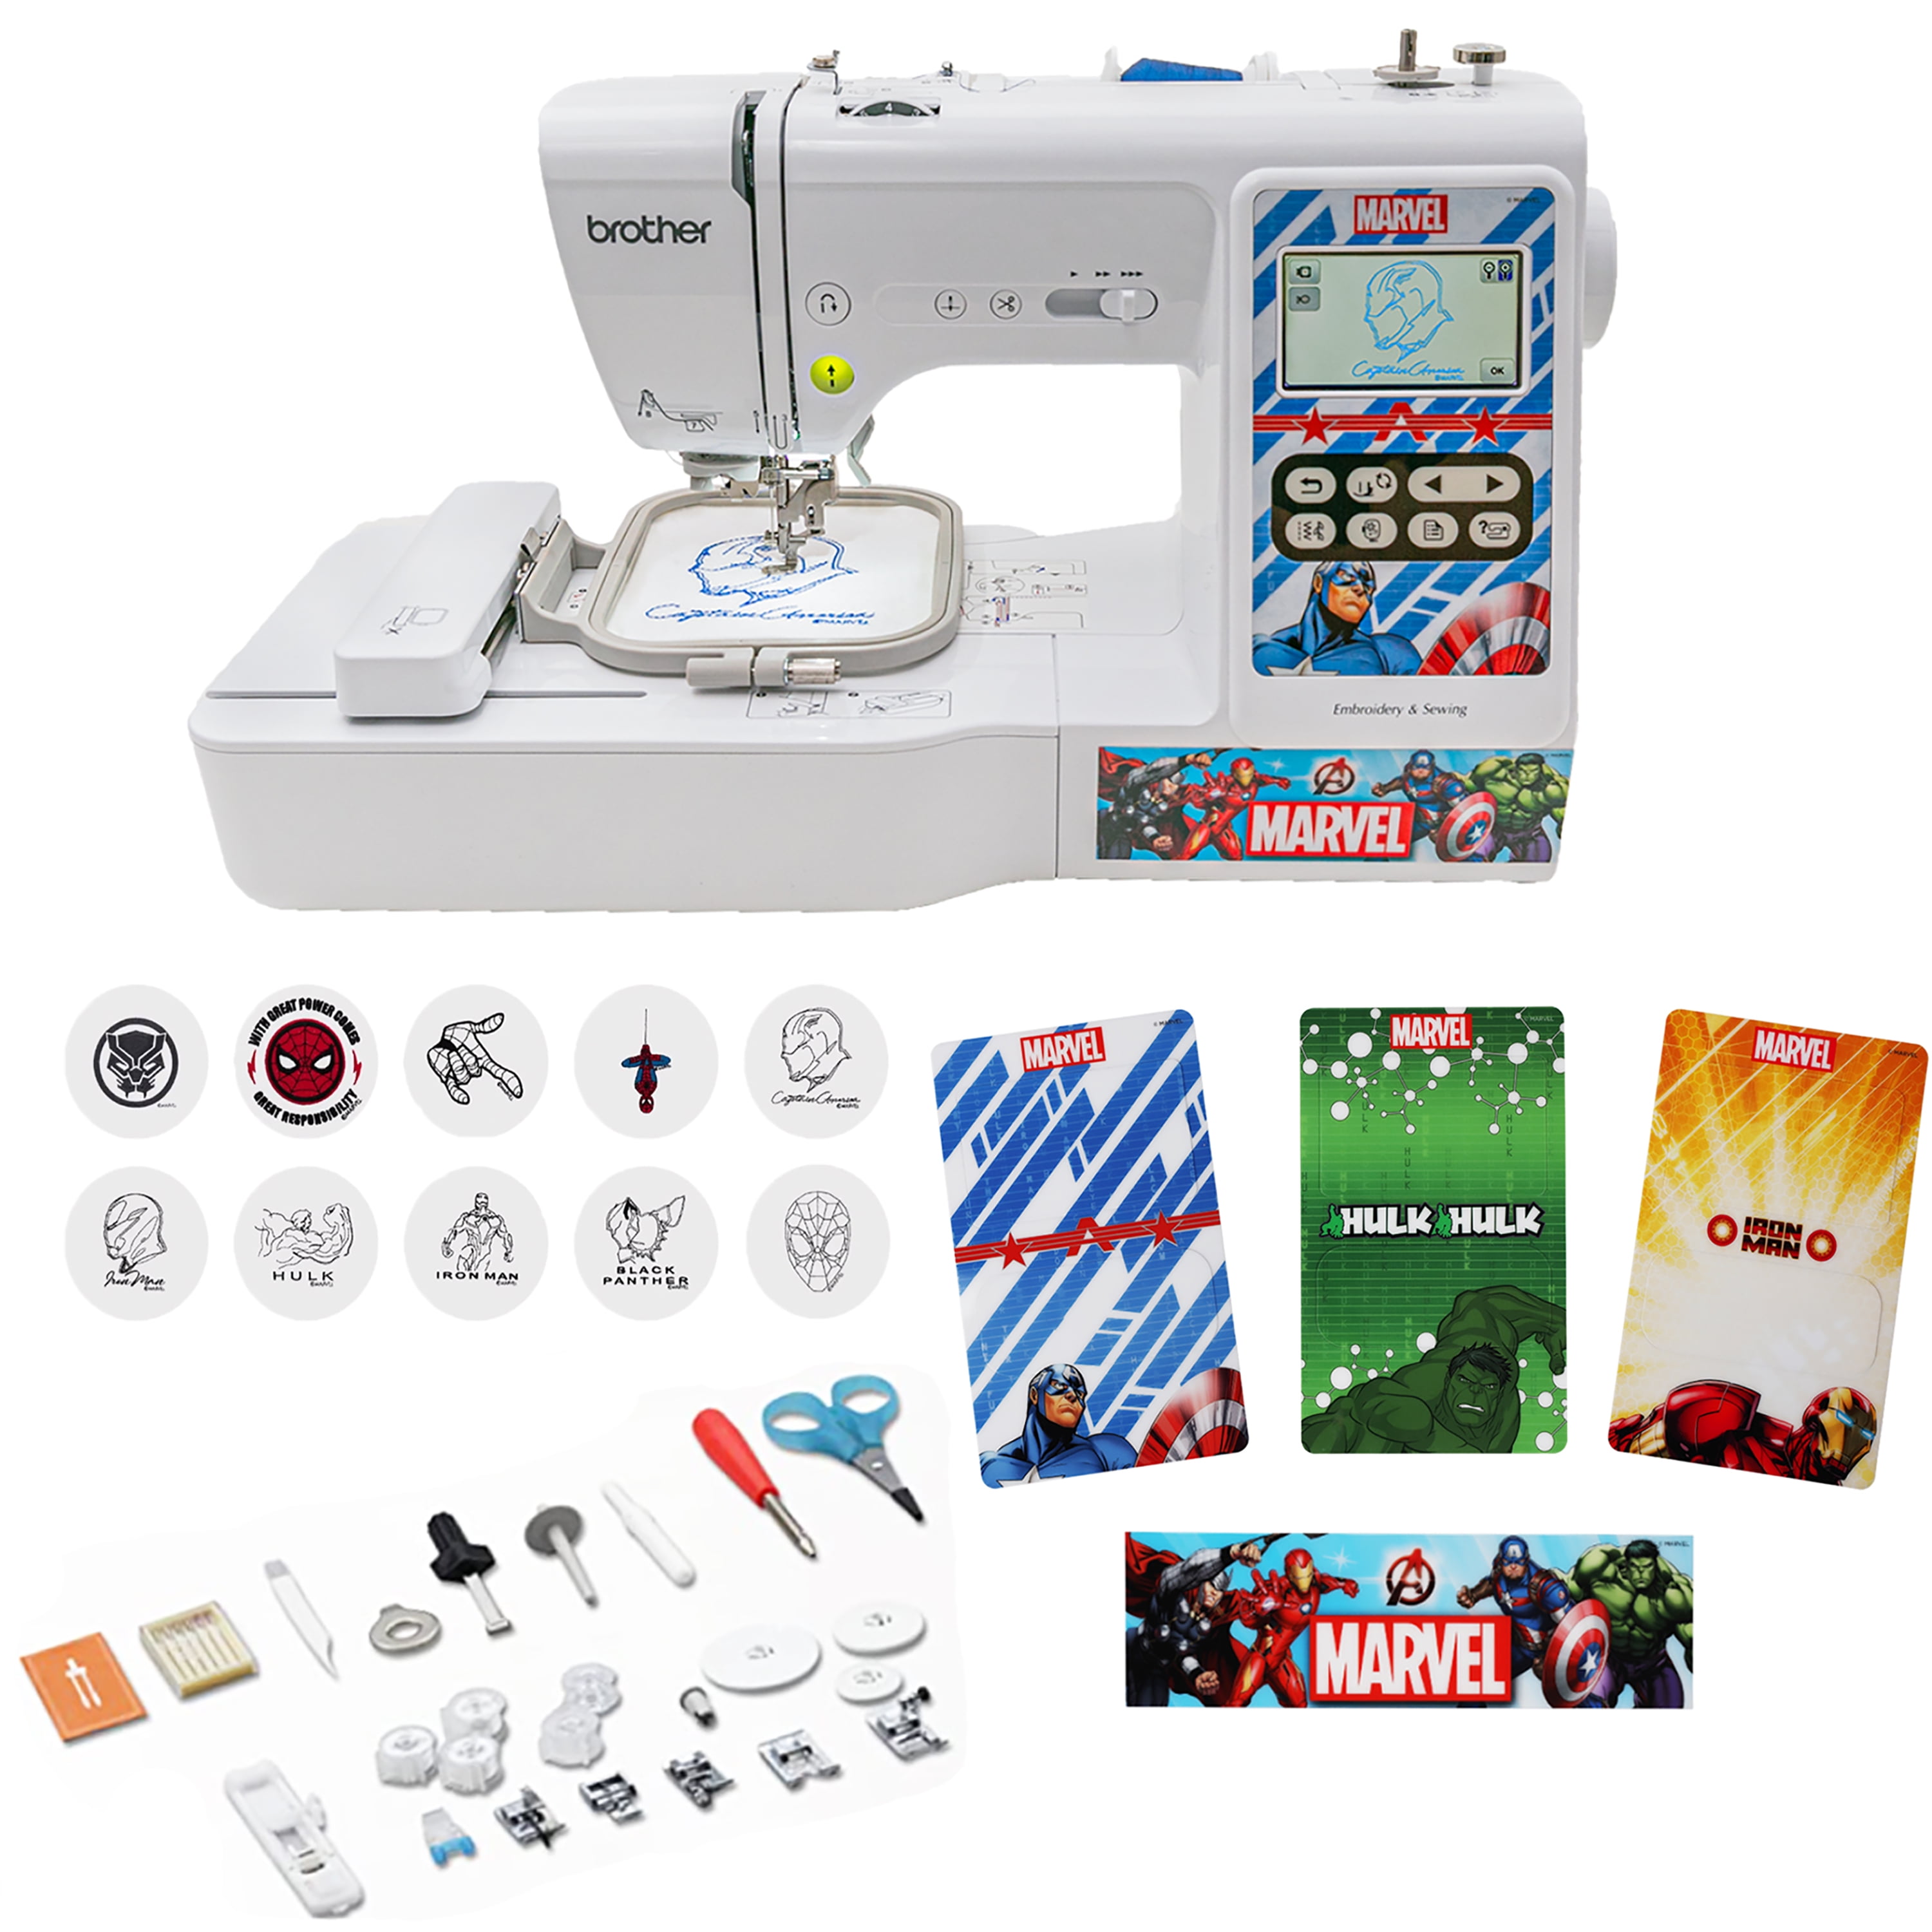 brother lb5000 embroidery software｜TikTok Search